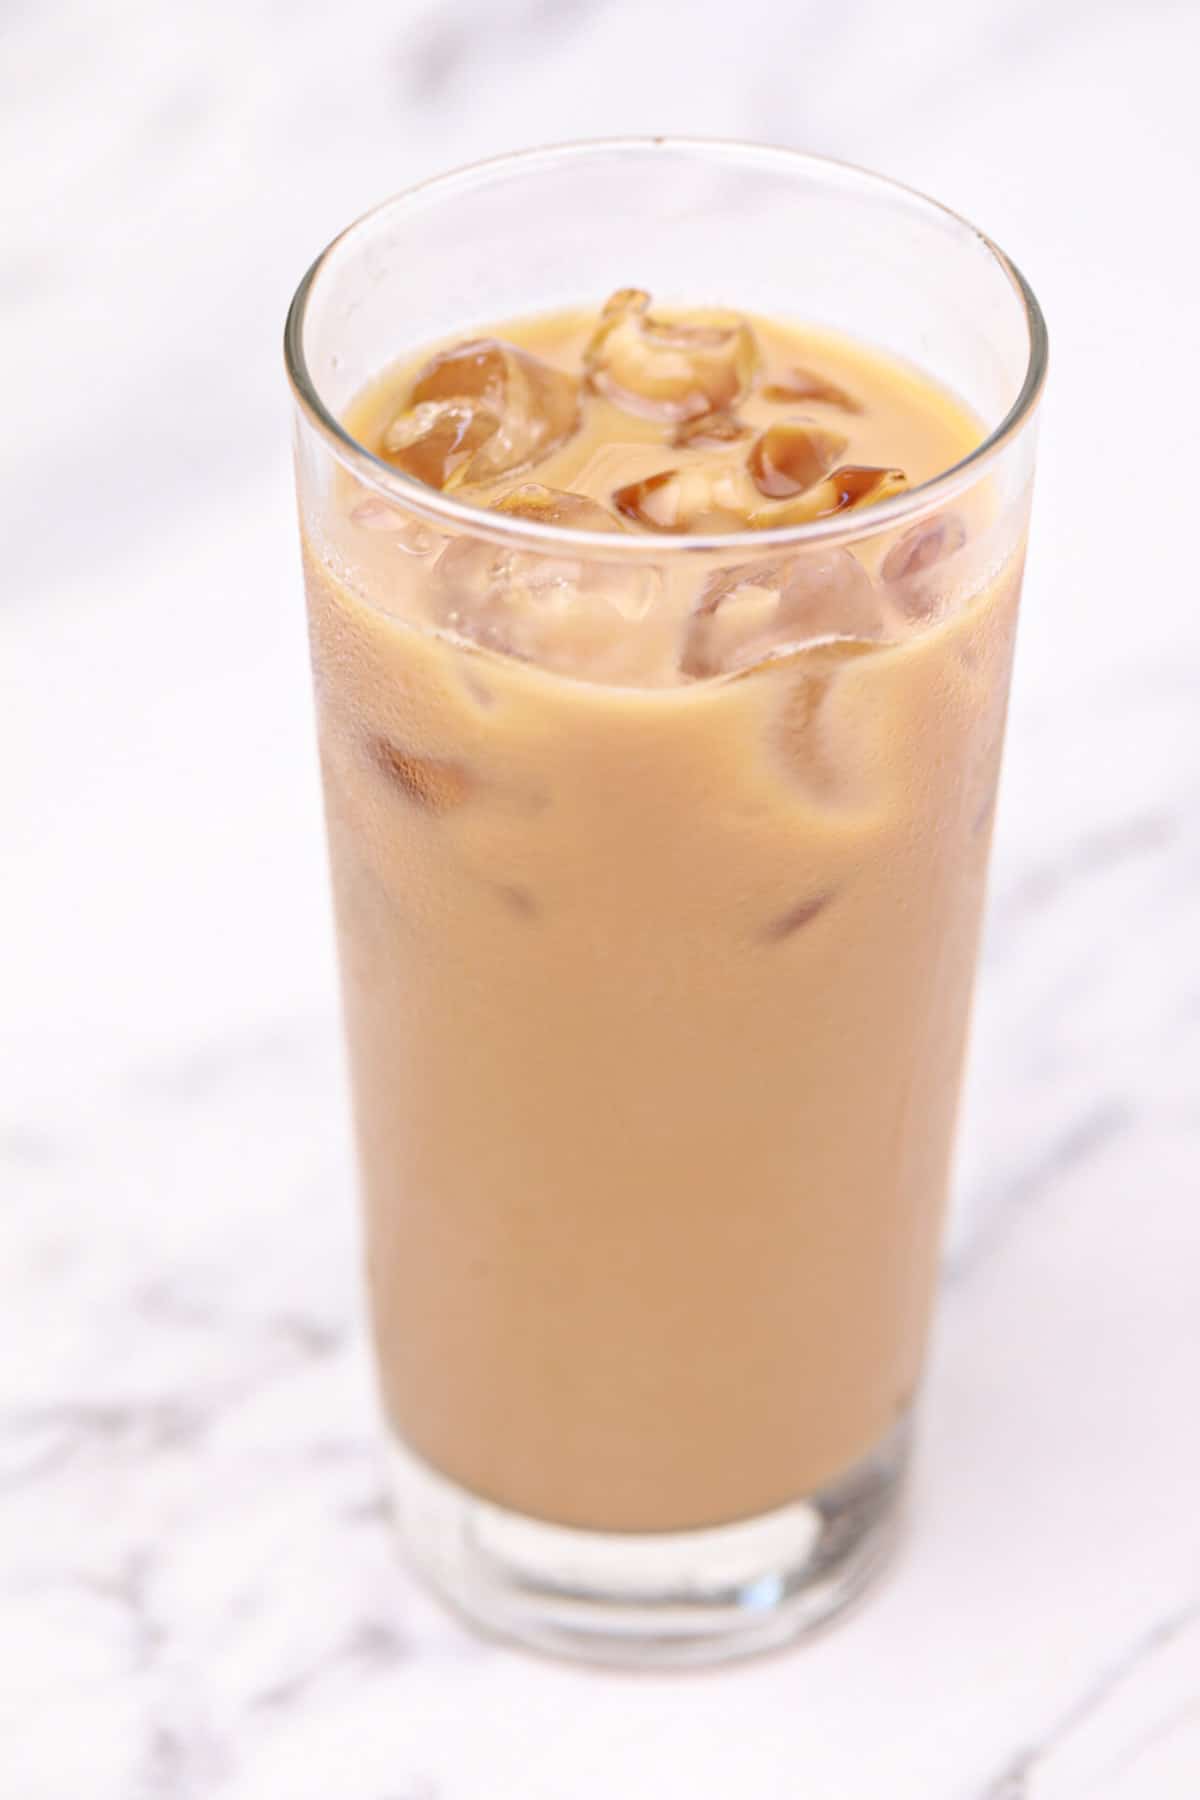 Iced coffee in a glass cup.